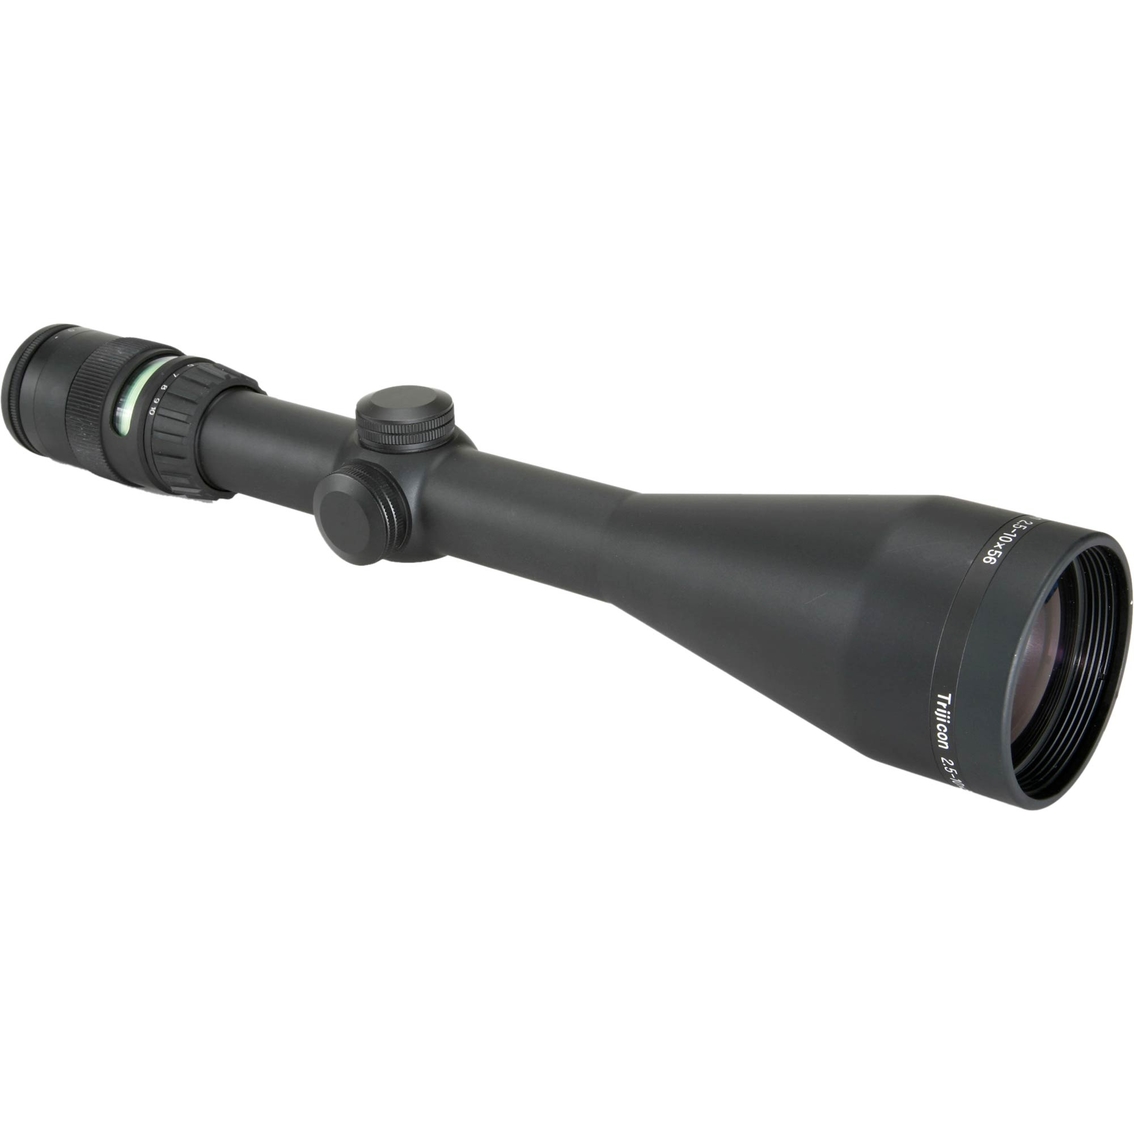 Trijicon Accupoint 2.5-10x56 Green MDT Riflescope - Image 2 of 5